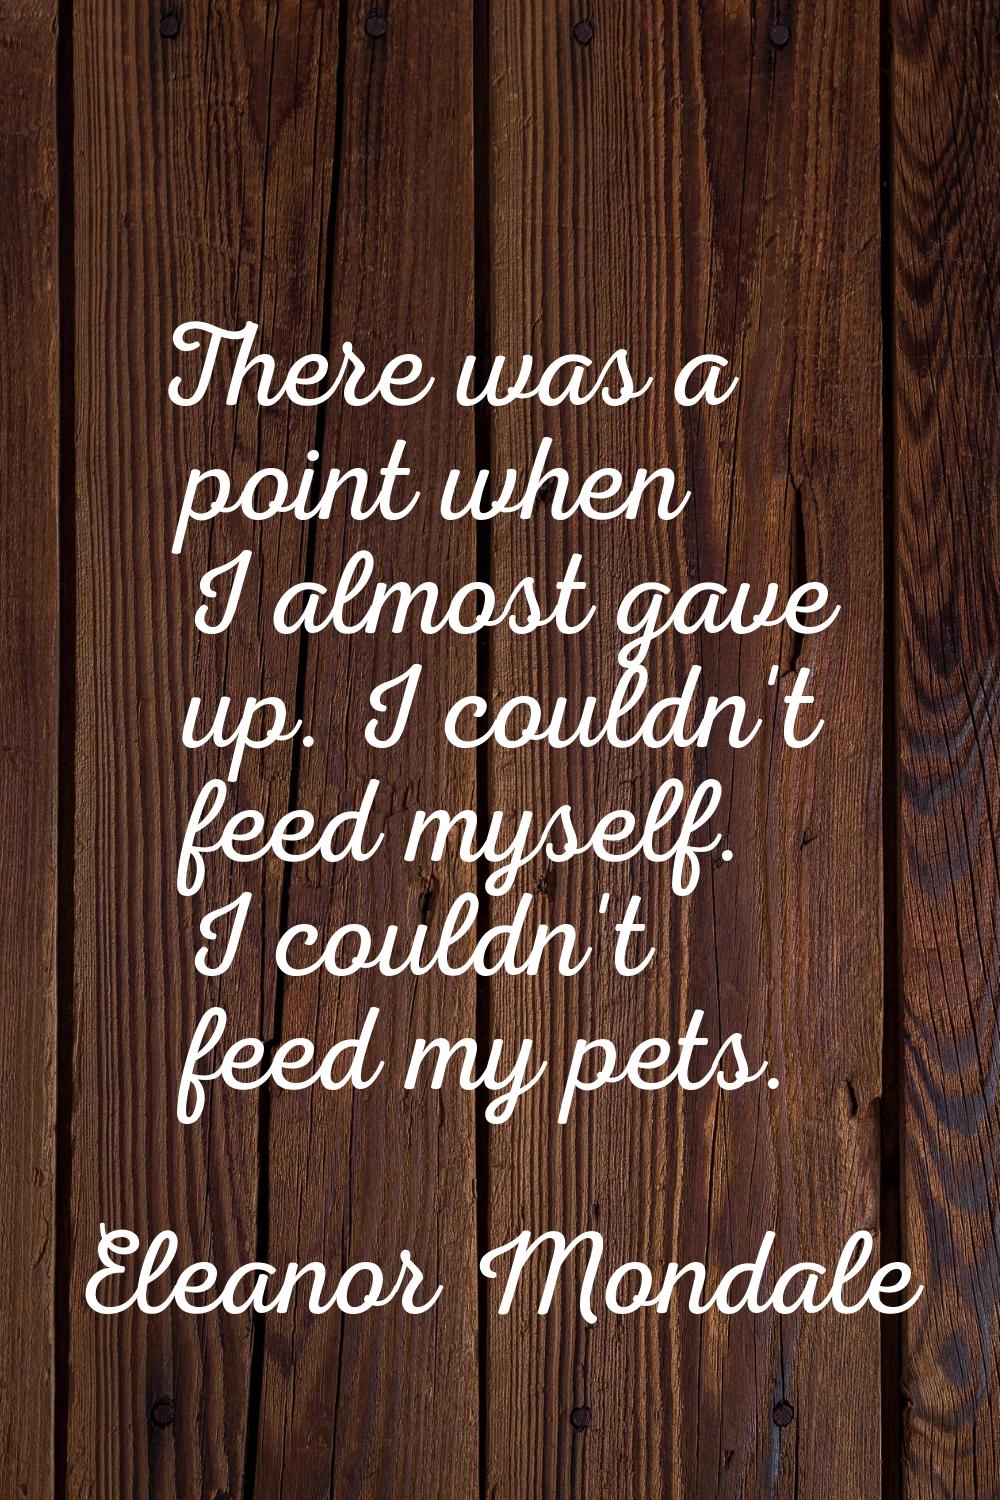 There was a point when I almost gave up. I couldn't feed myself. I couldn't feed my pets.